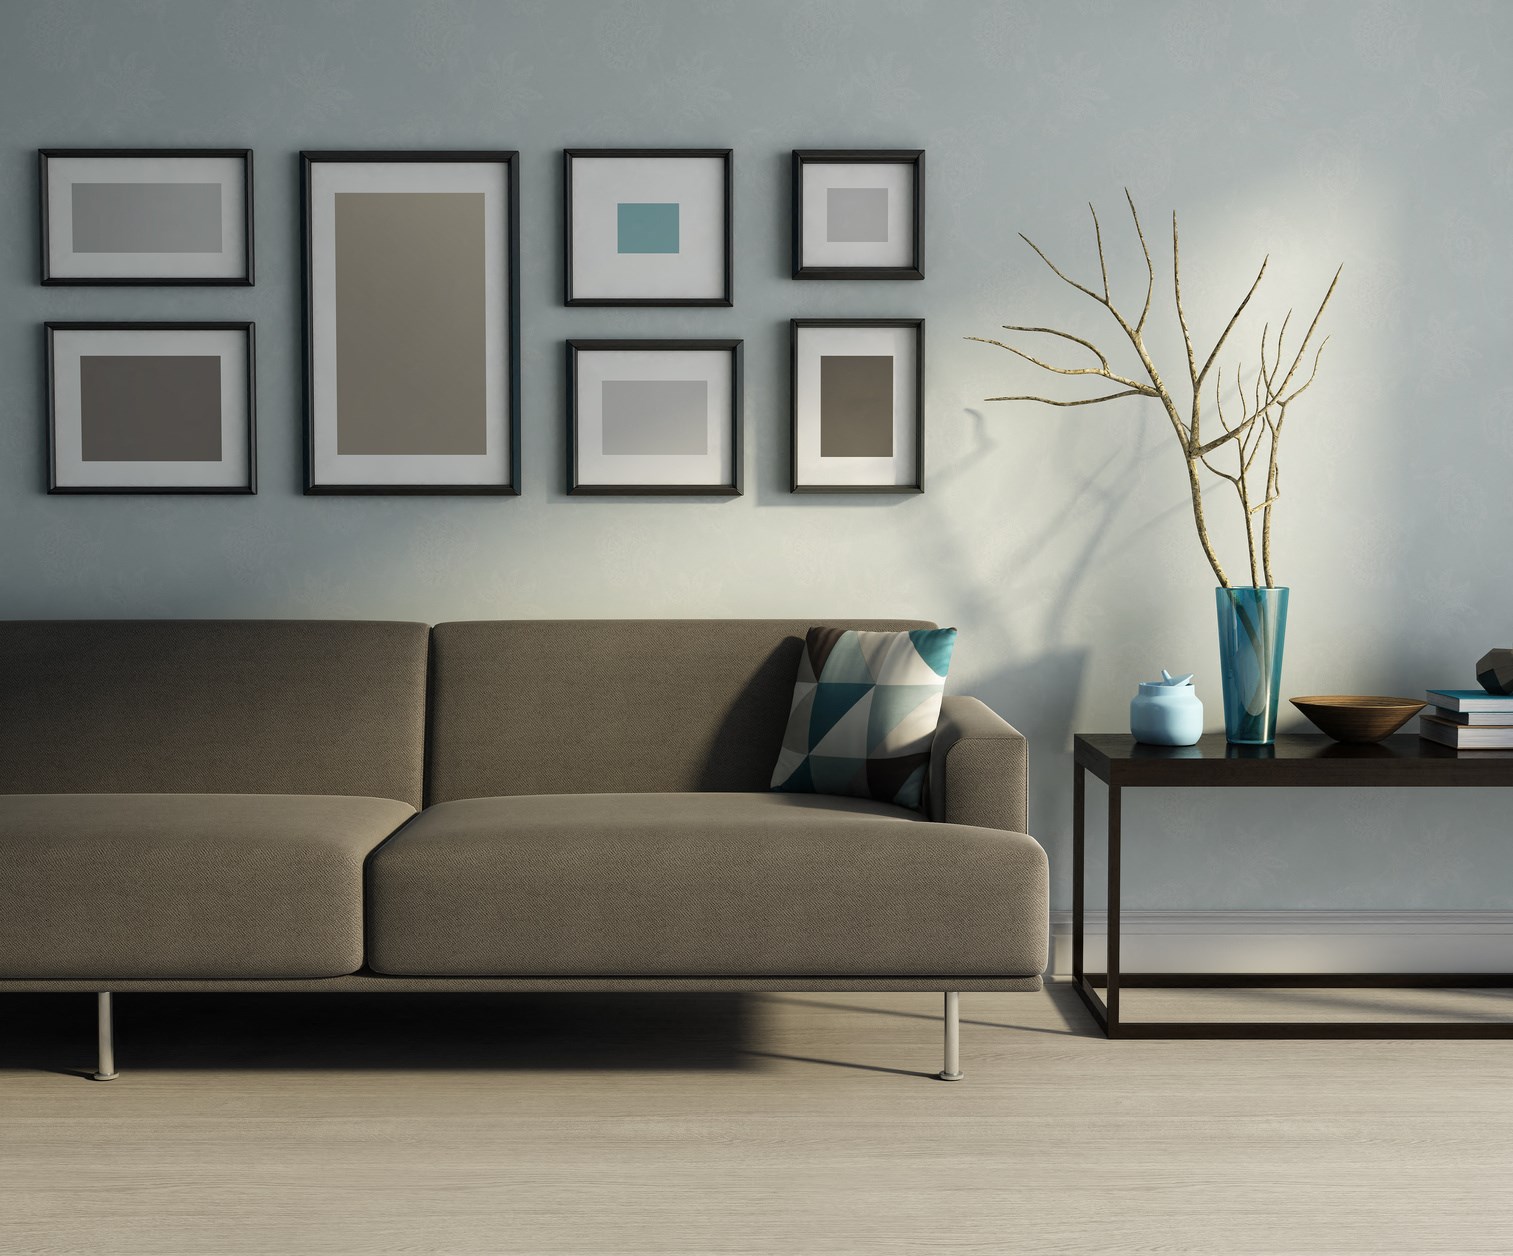 Furnished model of living room with grey wall and wood flooring